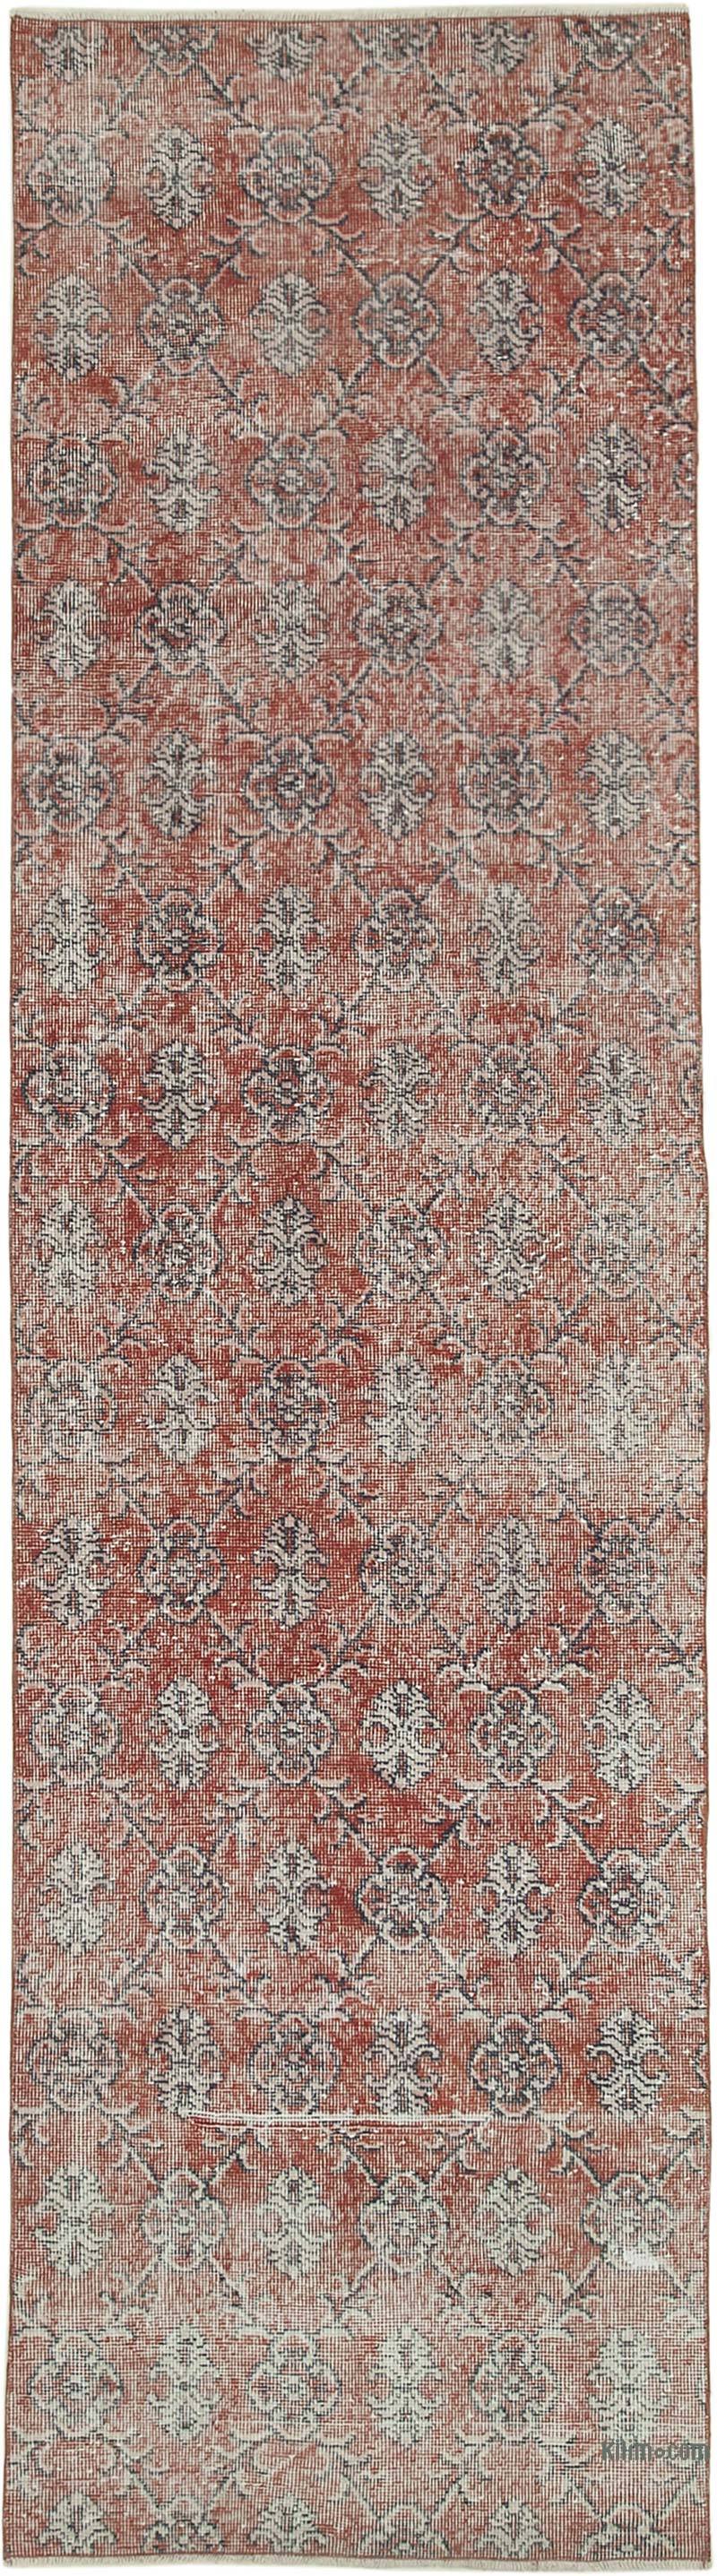 Red Over-dyed Turkish Vintage Runner Rug - 3'  x 11'  (36 in. x 132 in.) - K0052160